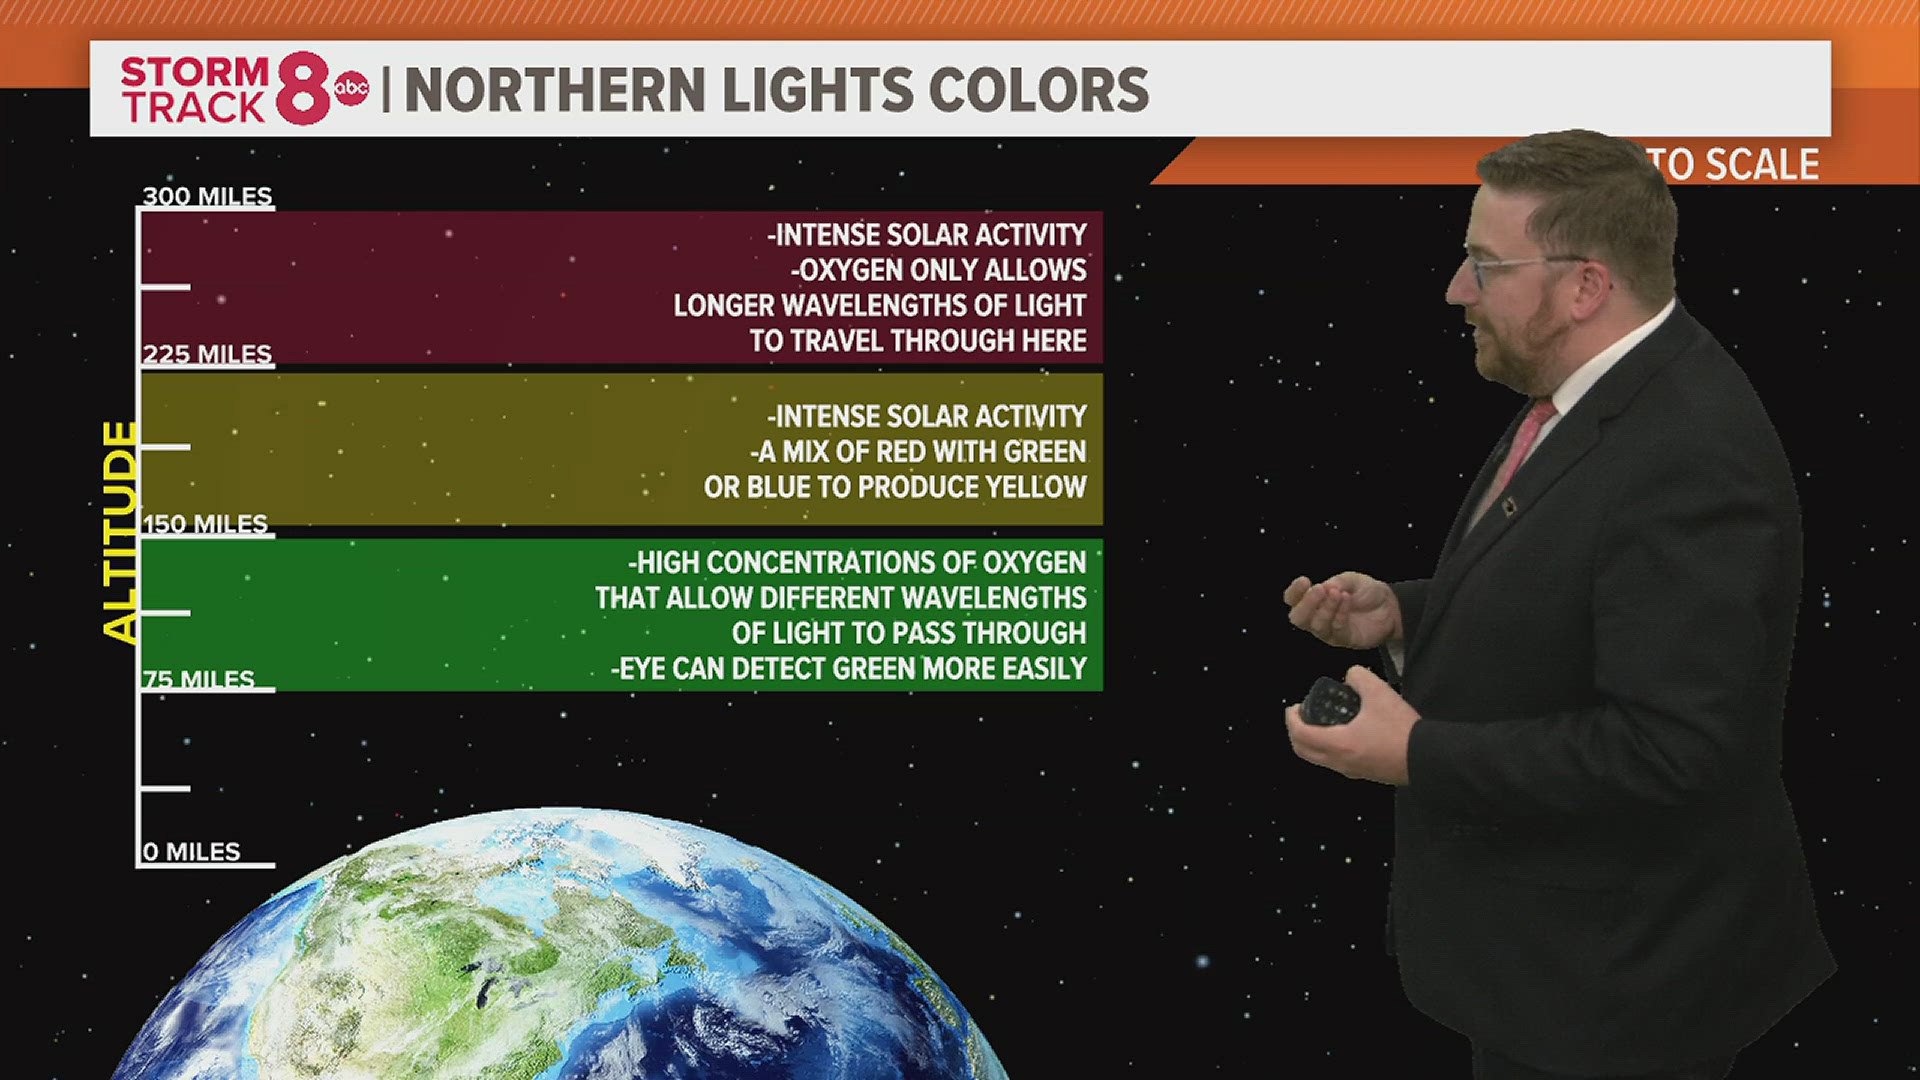 The Northern Lights most commonly appear with a green hue in the sky. Here's what produces those pinks and blues.